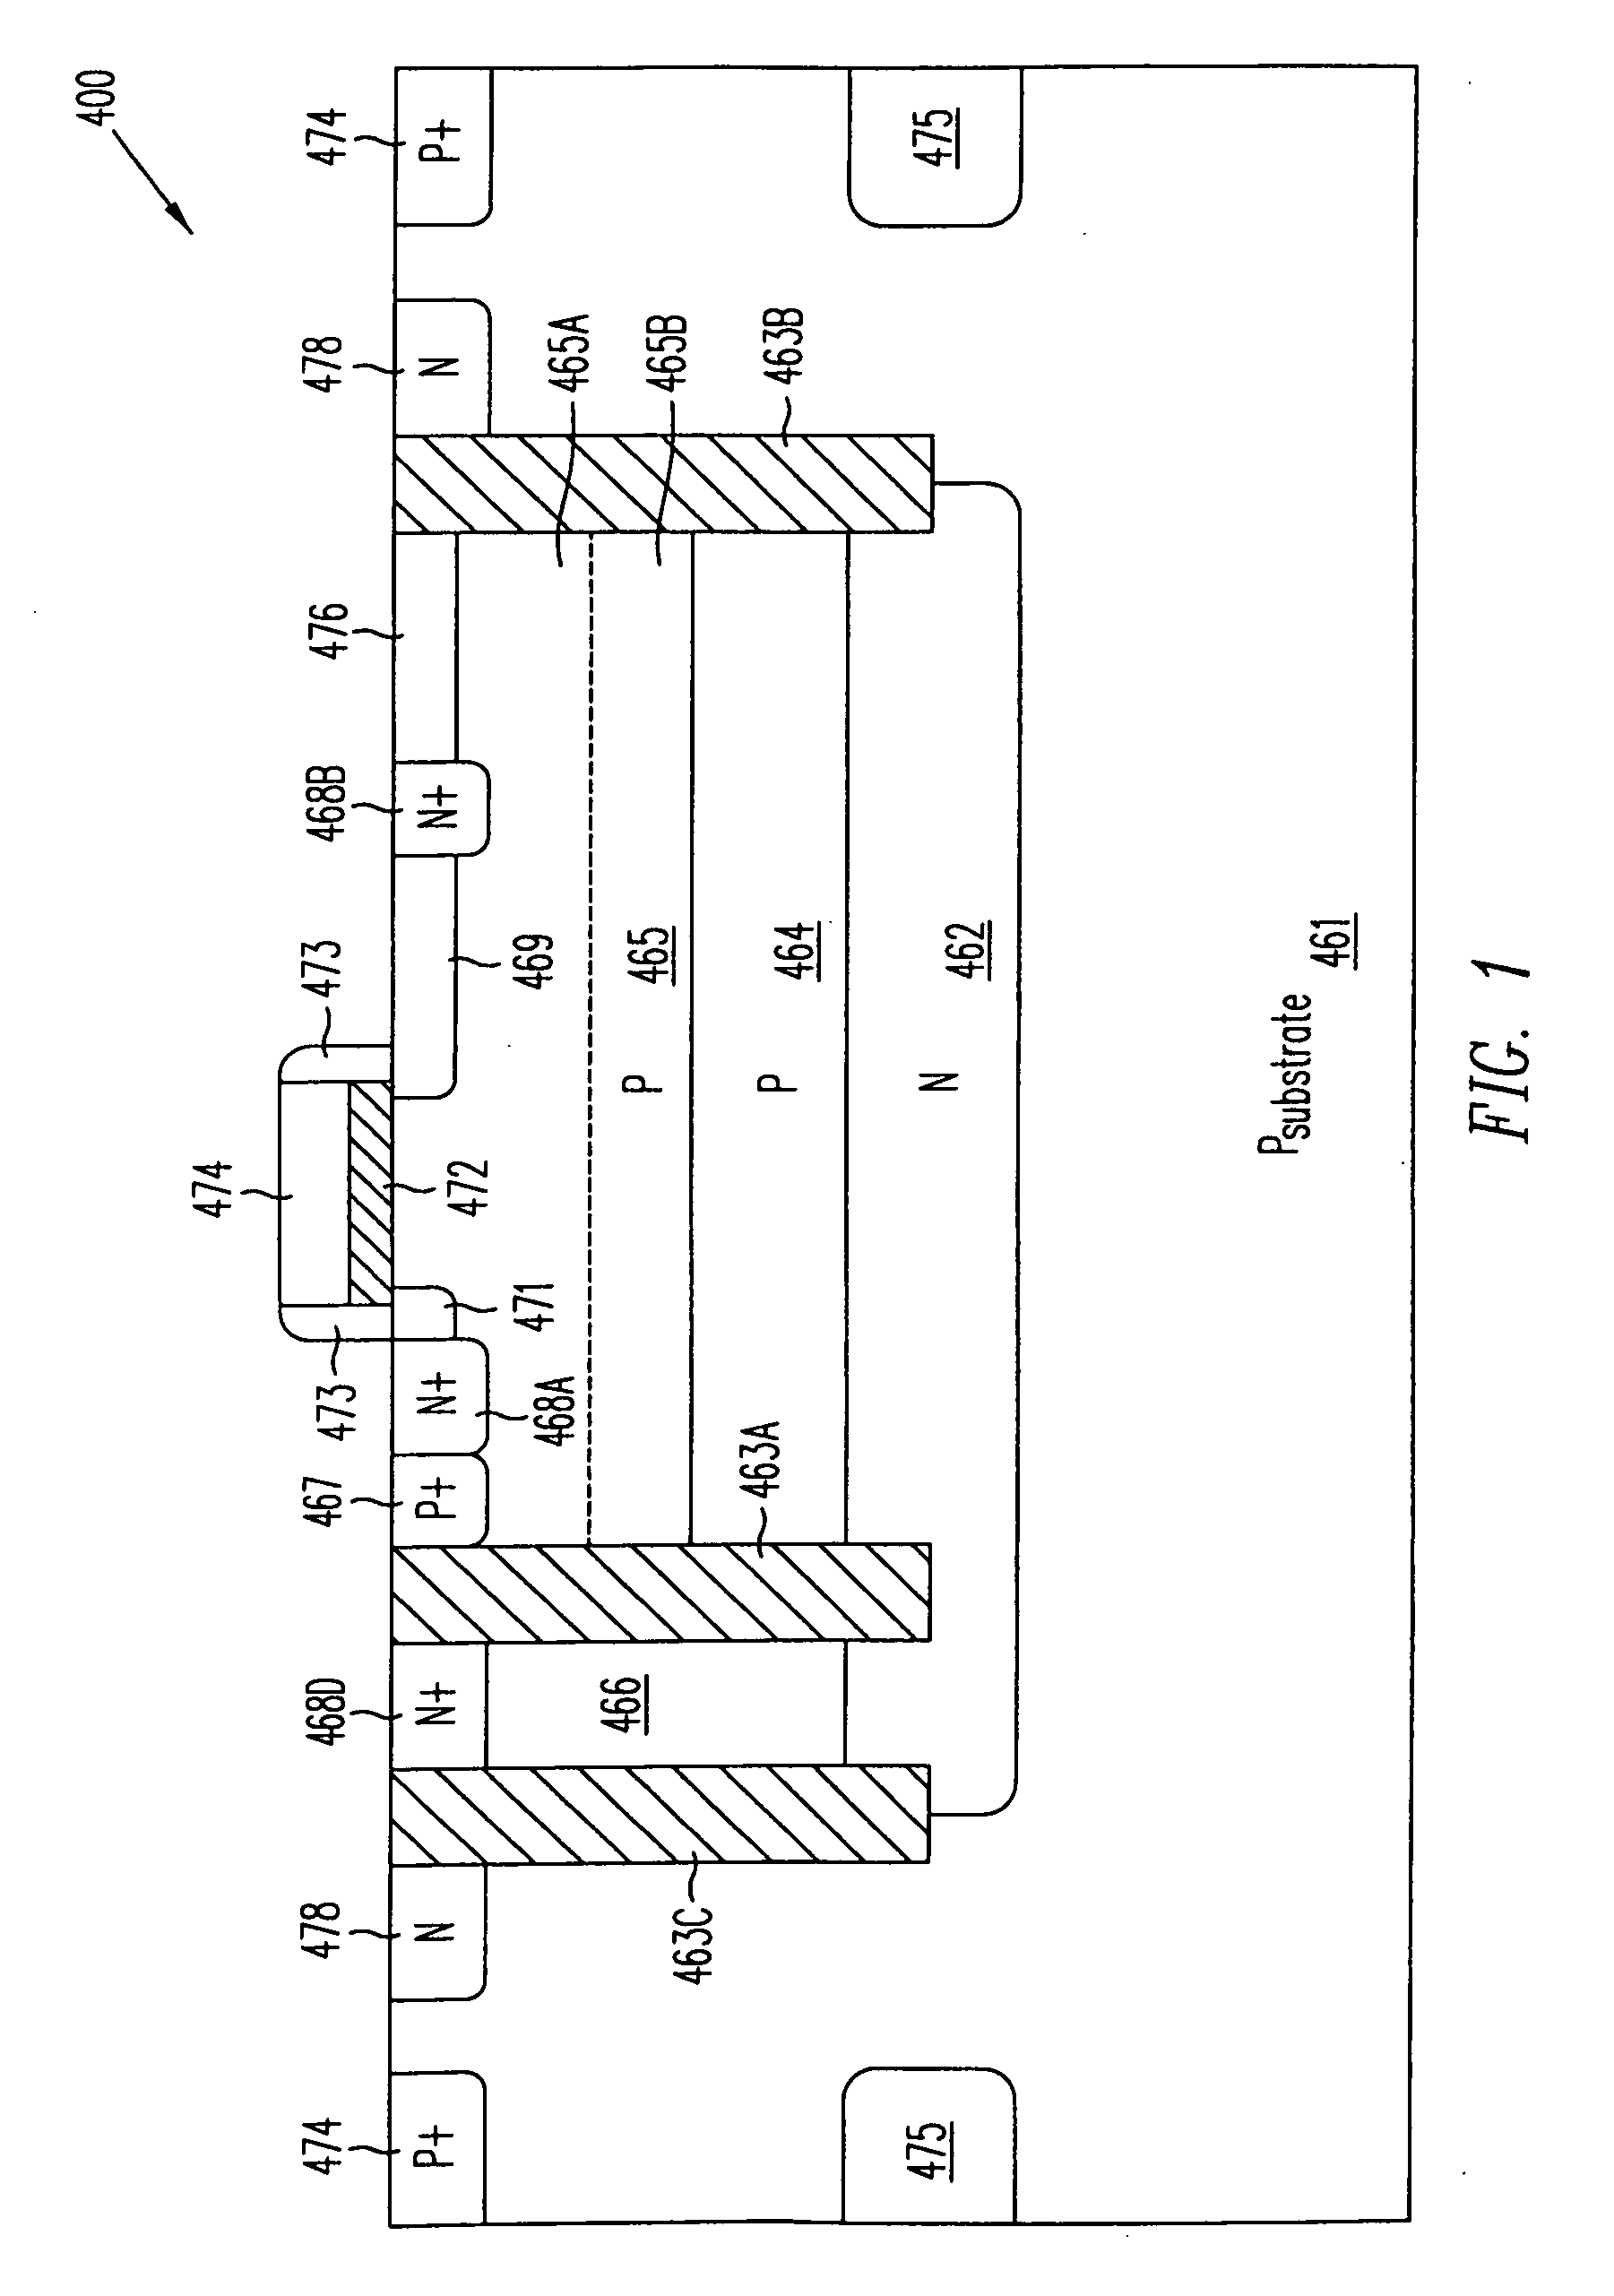 Isolation and termination structures for semiconductor die